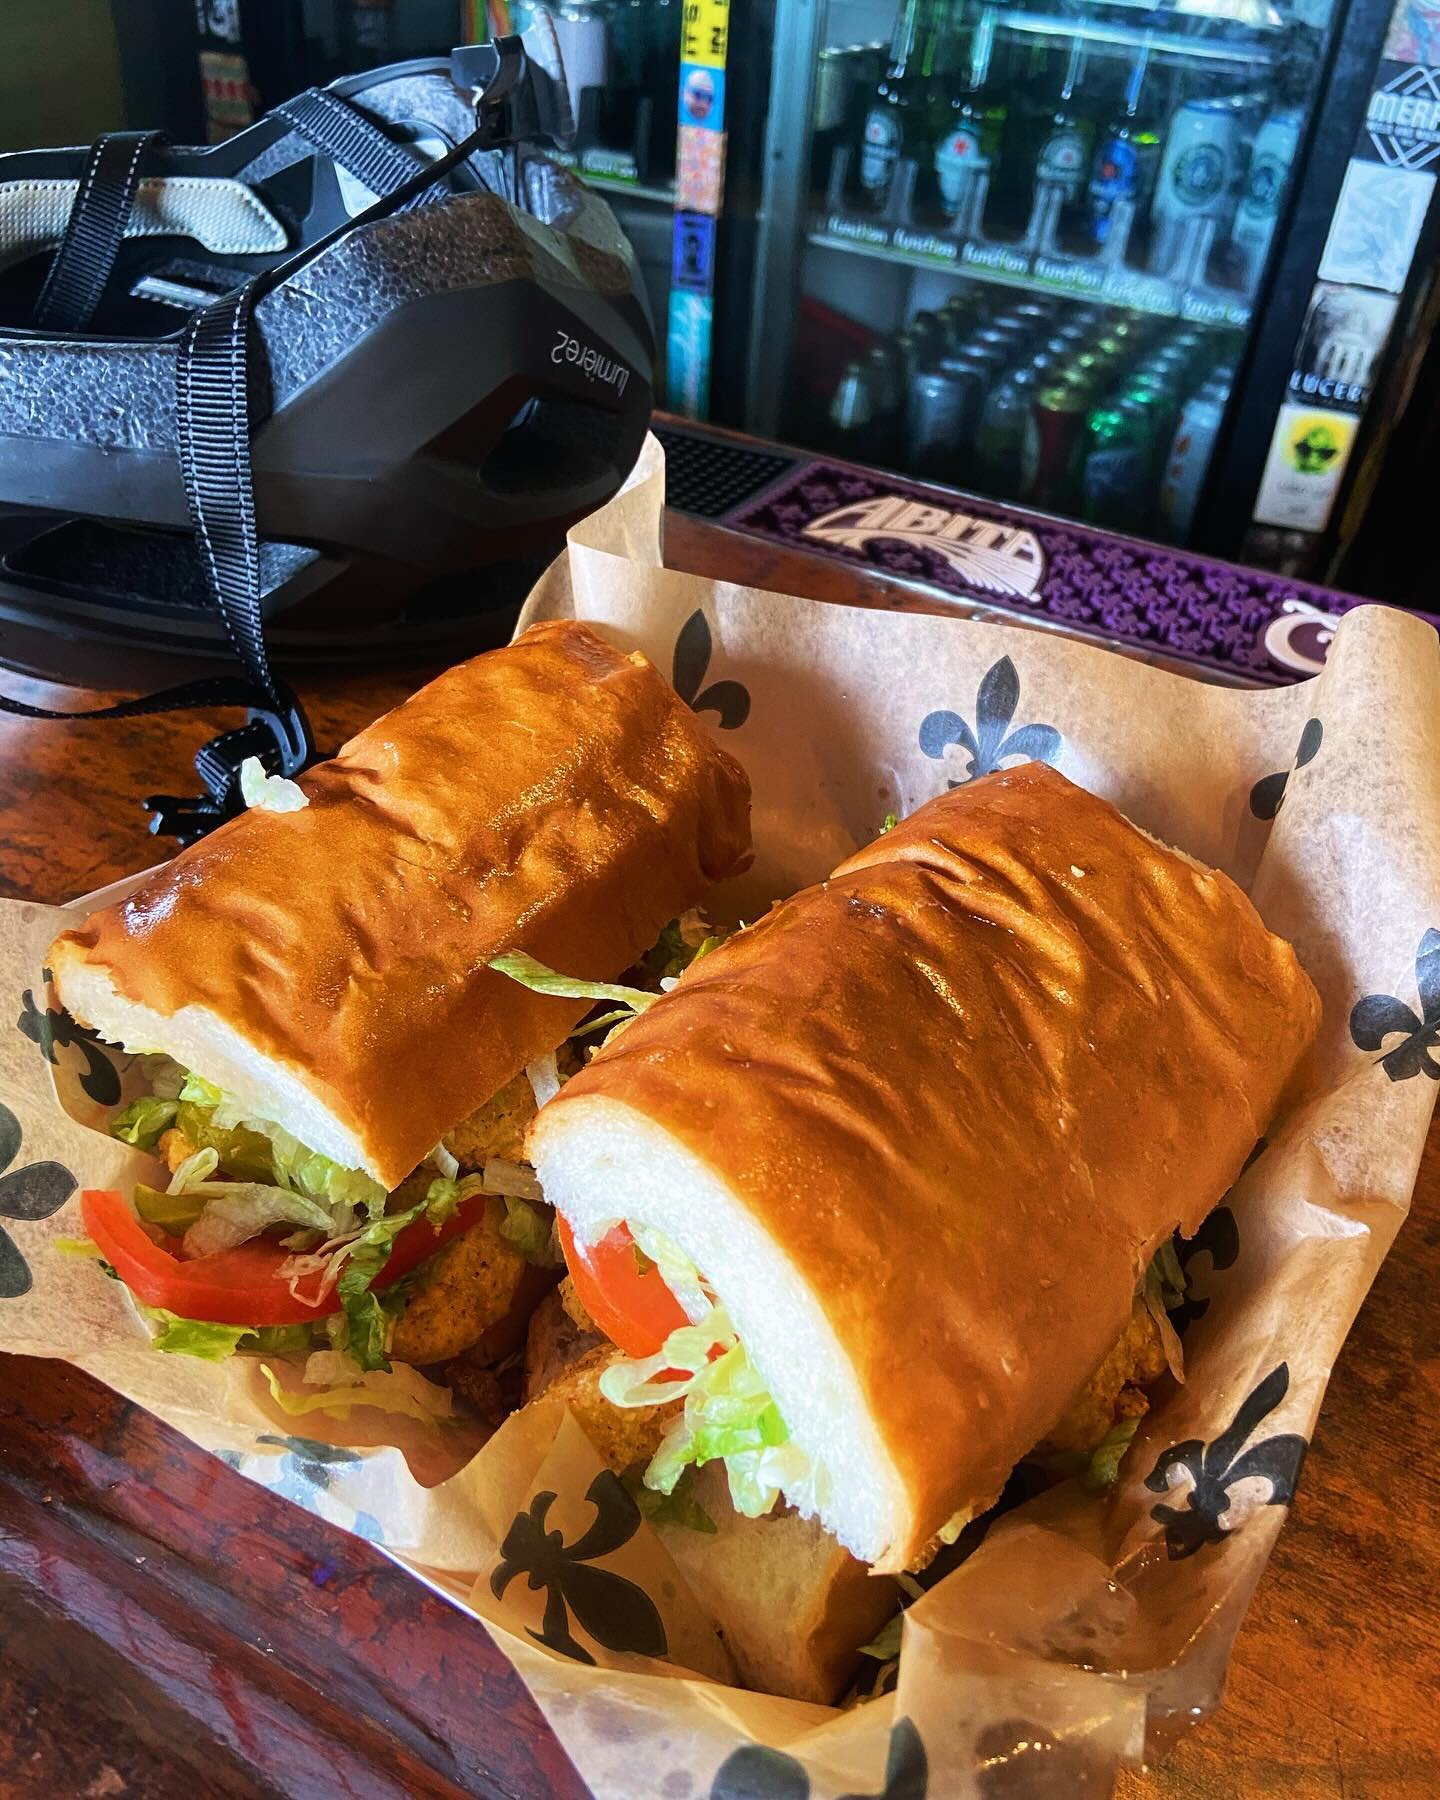 Poboy eating etiquette: Eat the shrimp falling off first, or eat the sandwich first and pick at the overboards after? -  What&rsquo;s the perfect formula?